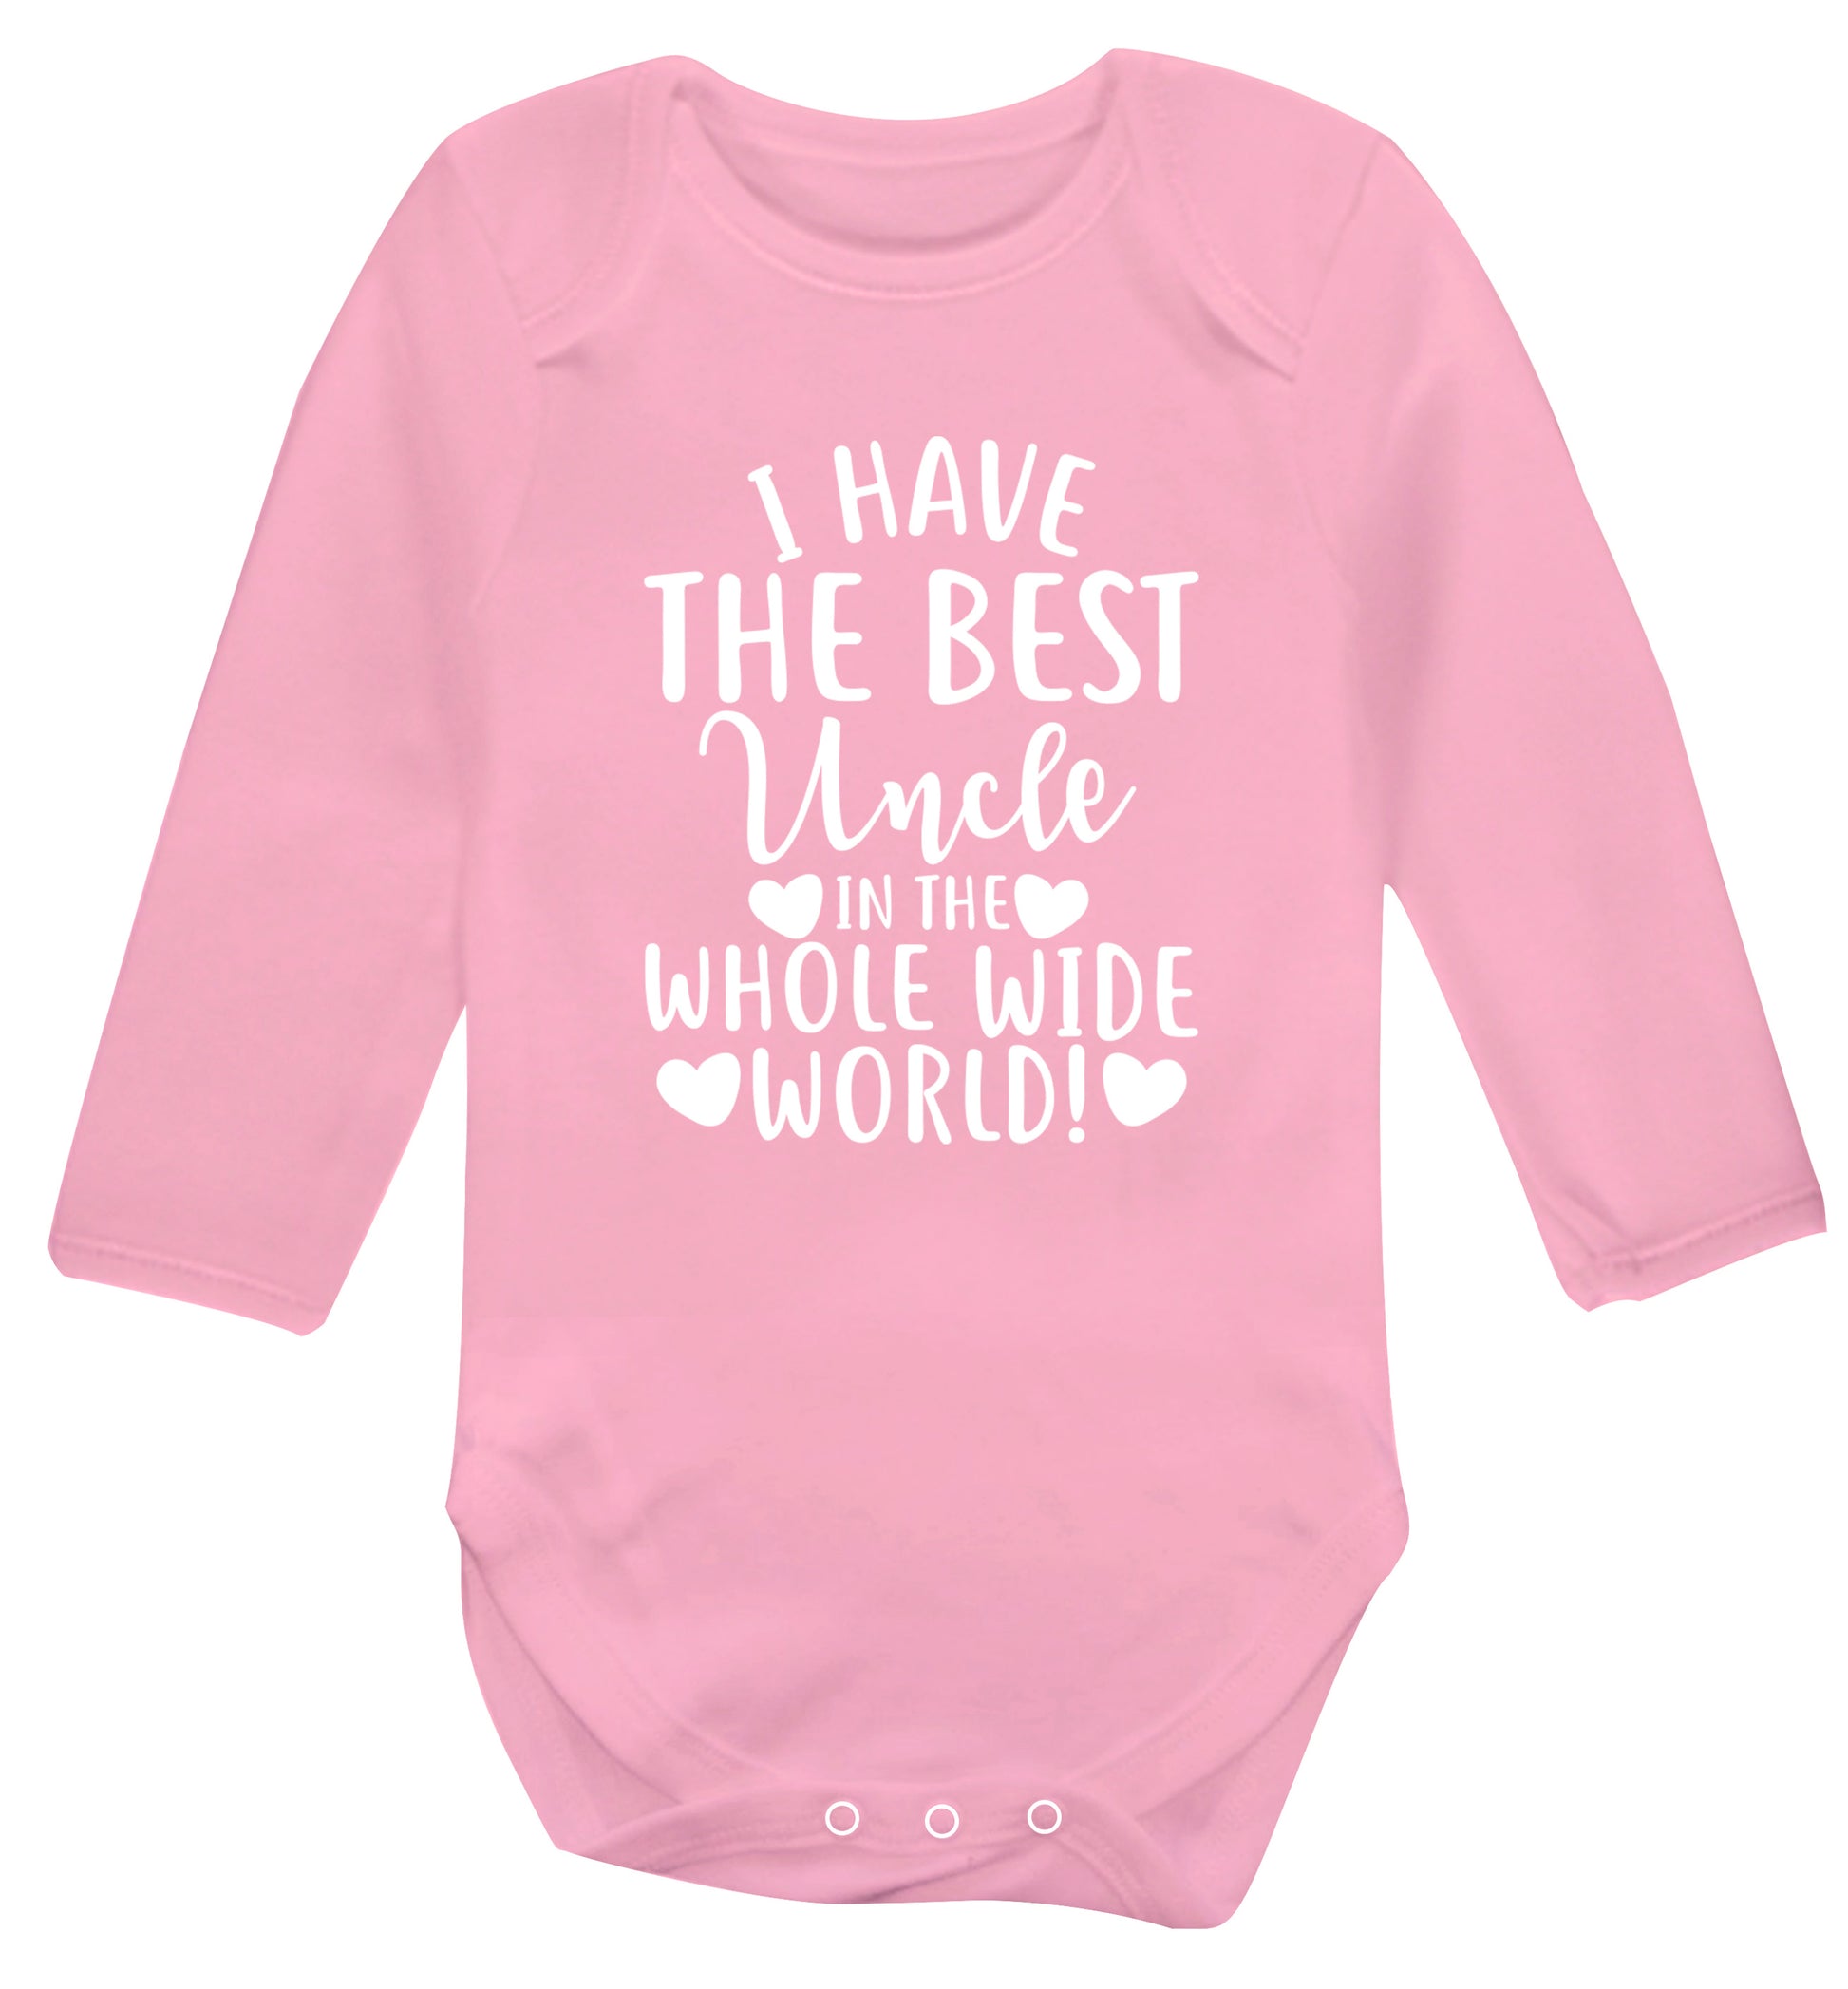 I have the best uncle in the whole wide world! Baby Vest long sleeved pale pink 6-12 months